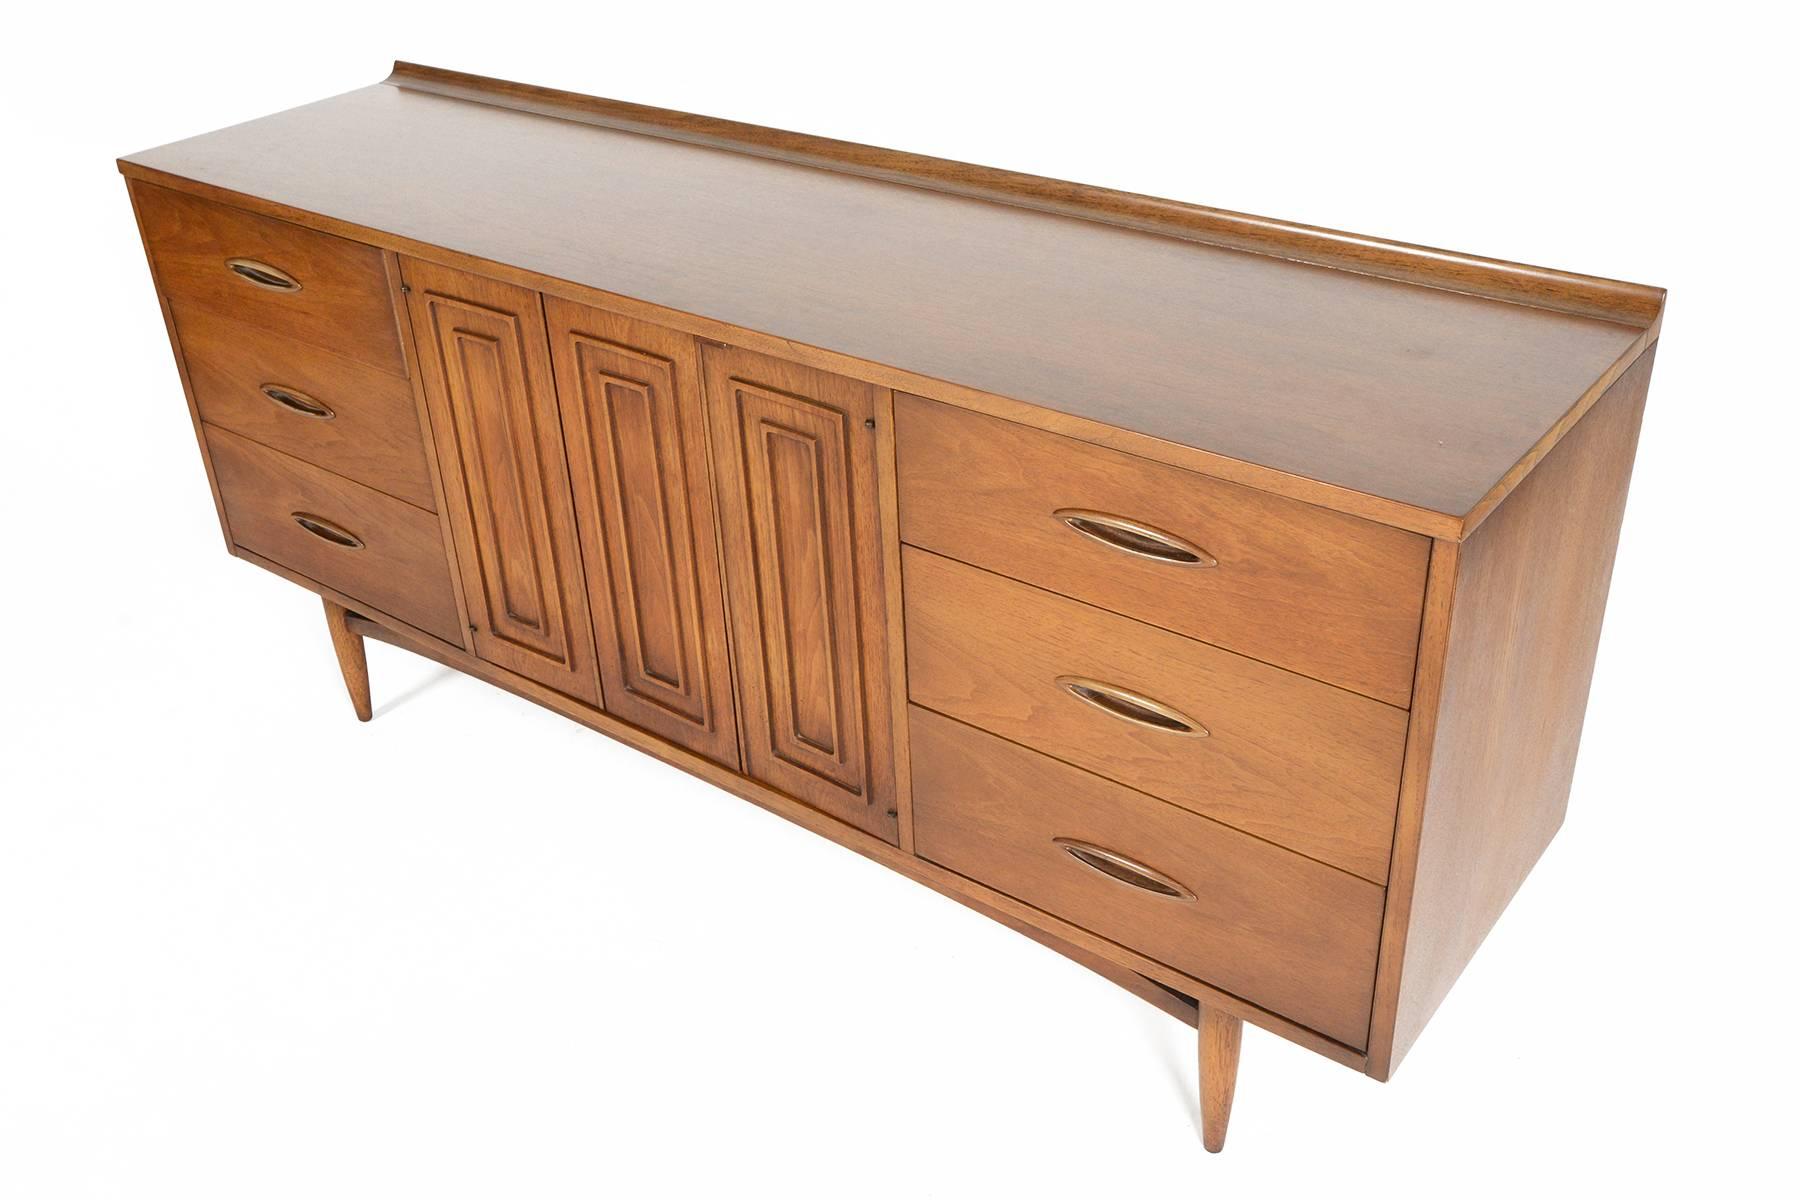 This stunning low nine-drawer dresser was designed and manufactured by Broyhill in 1957 for their extremely successful line of Sculptra furniture. Designed to offer minimal adornment and clean lines, this dresser will work well in any modern home.